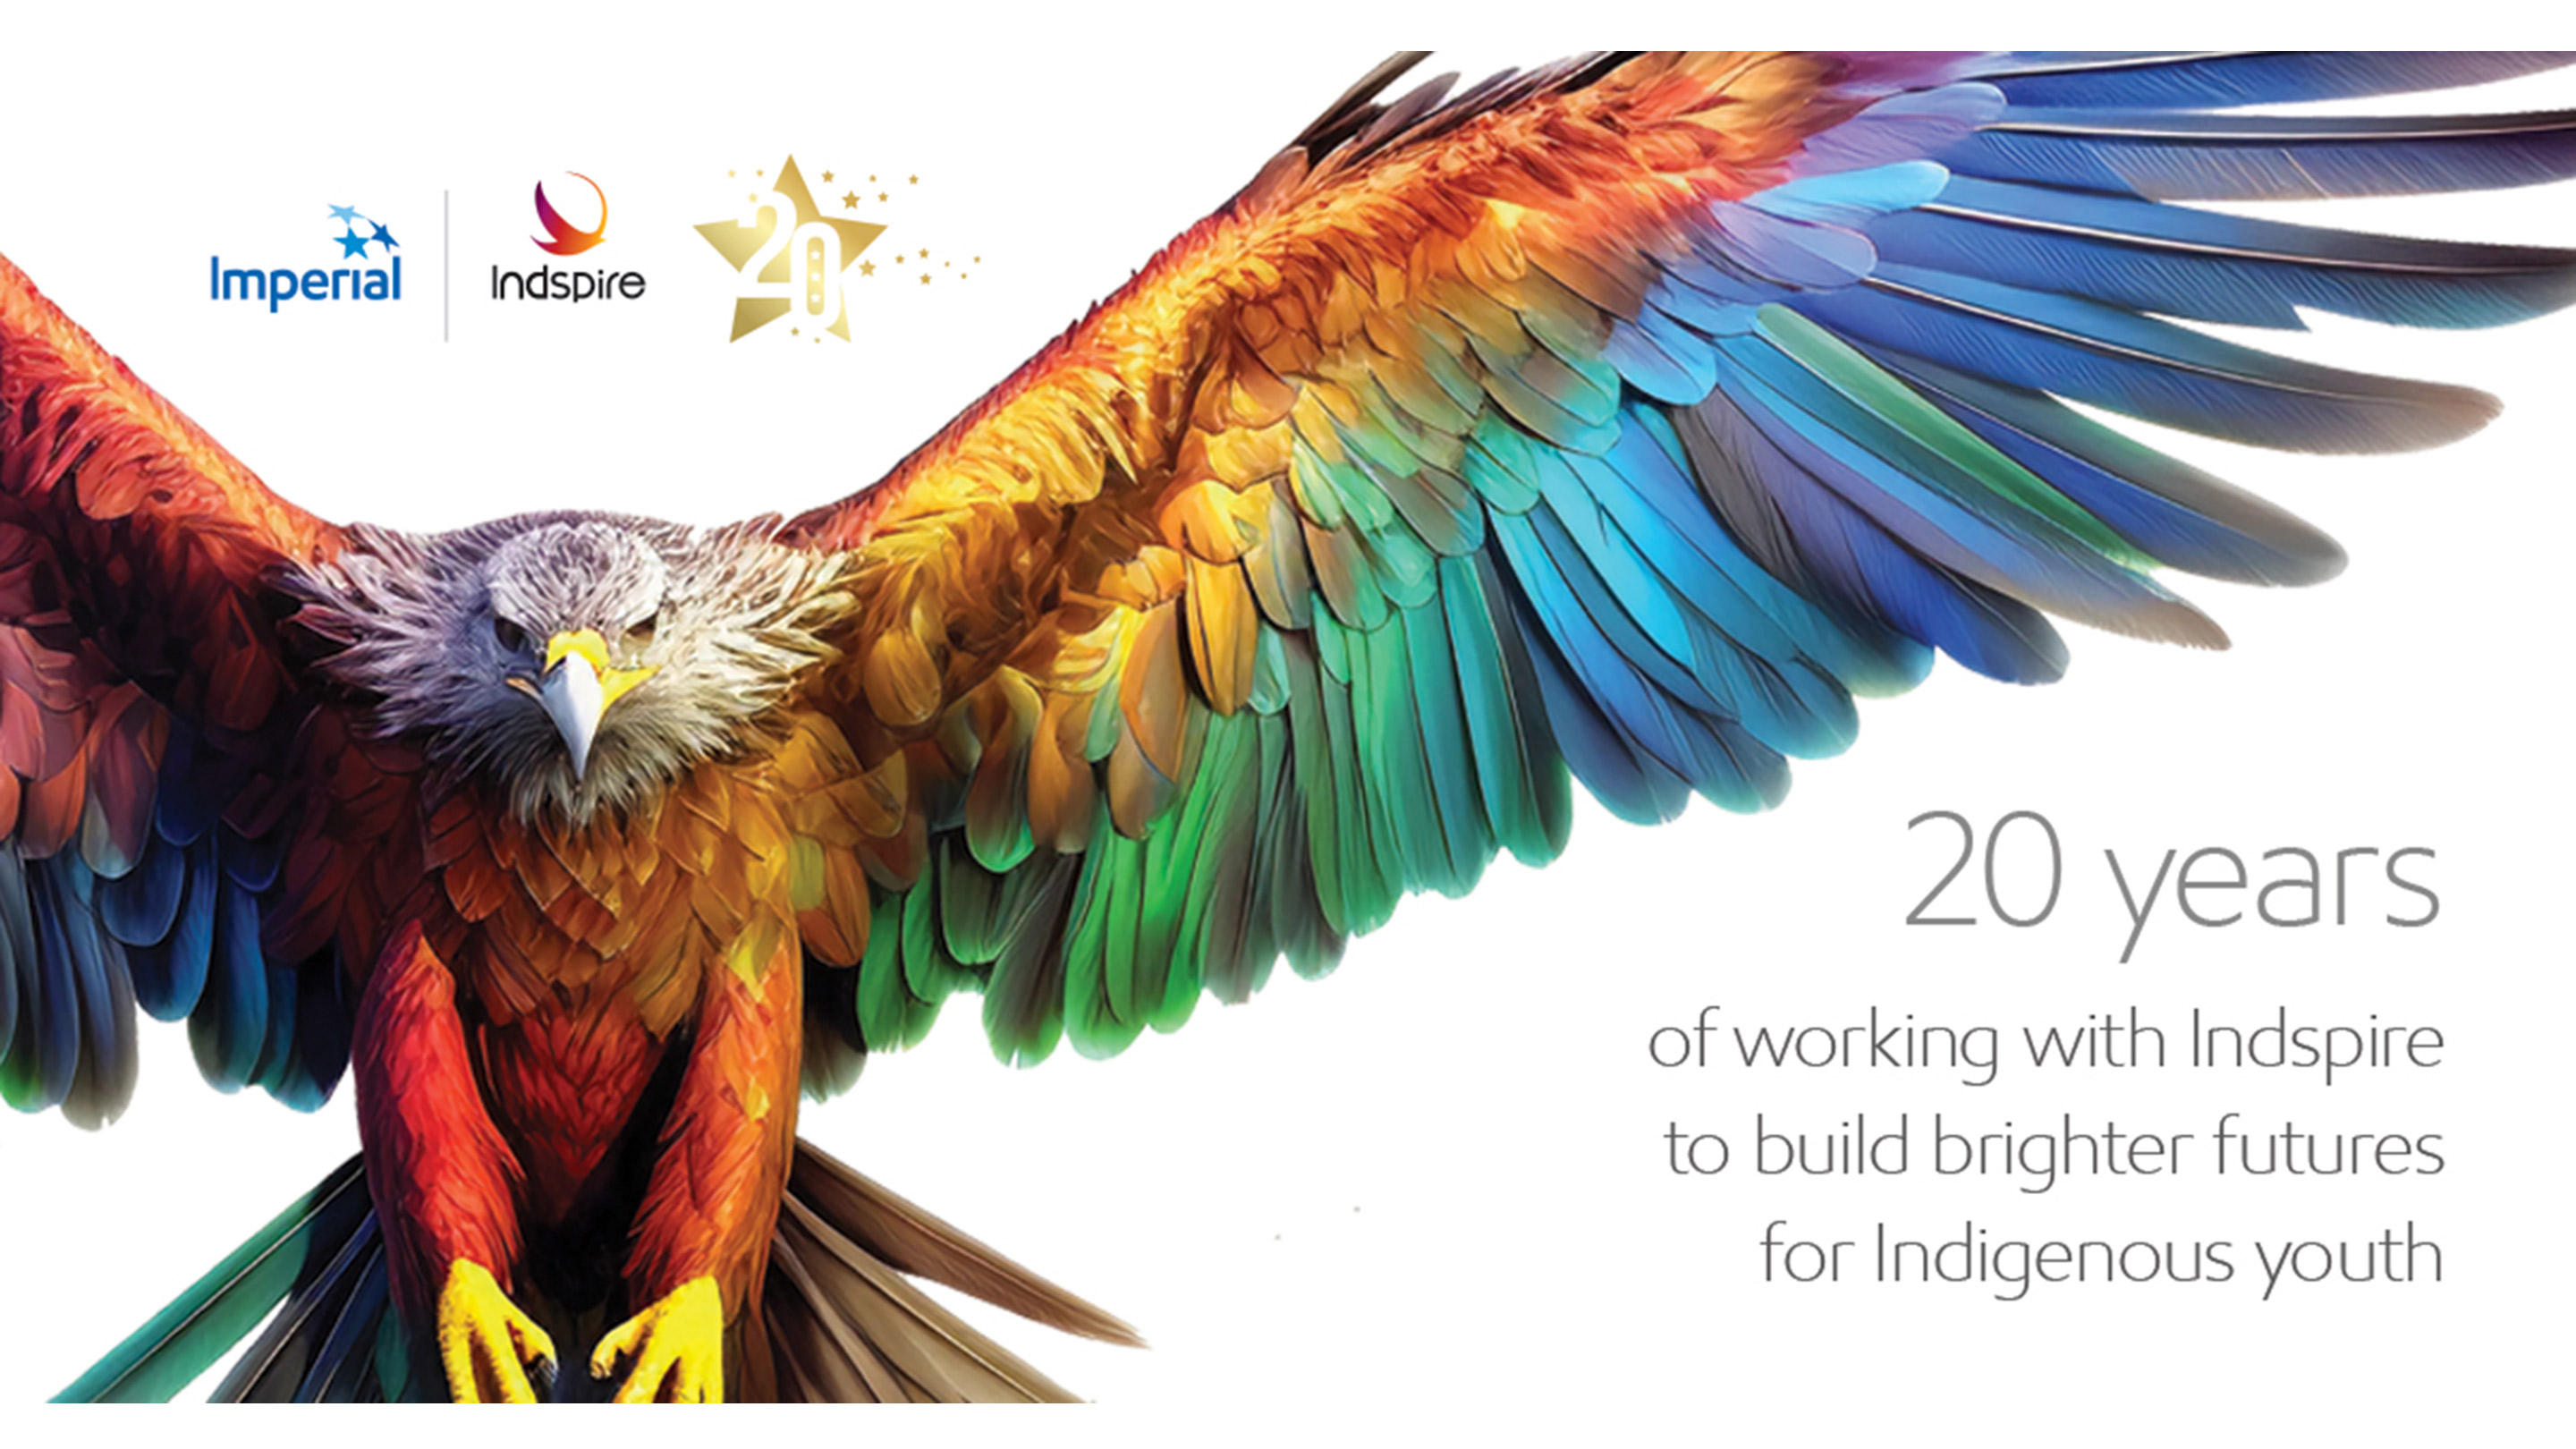 20 years of working with Indspire to build brighter futures for Indigenous youth